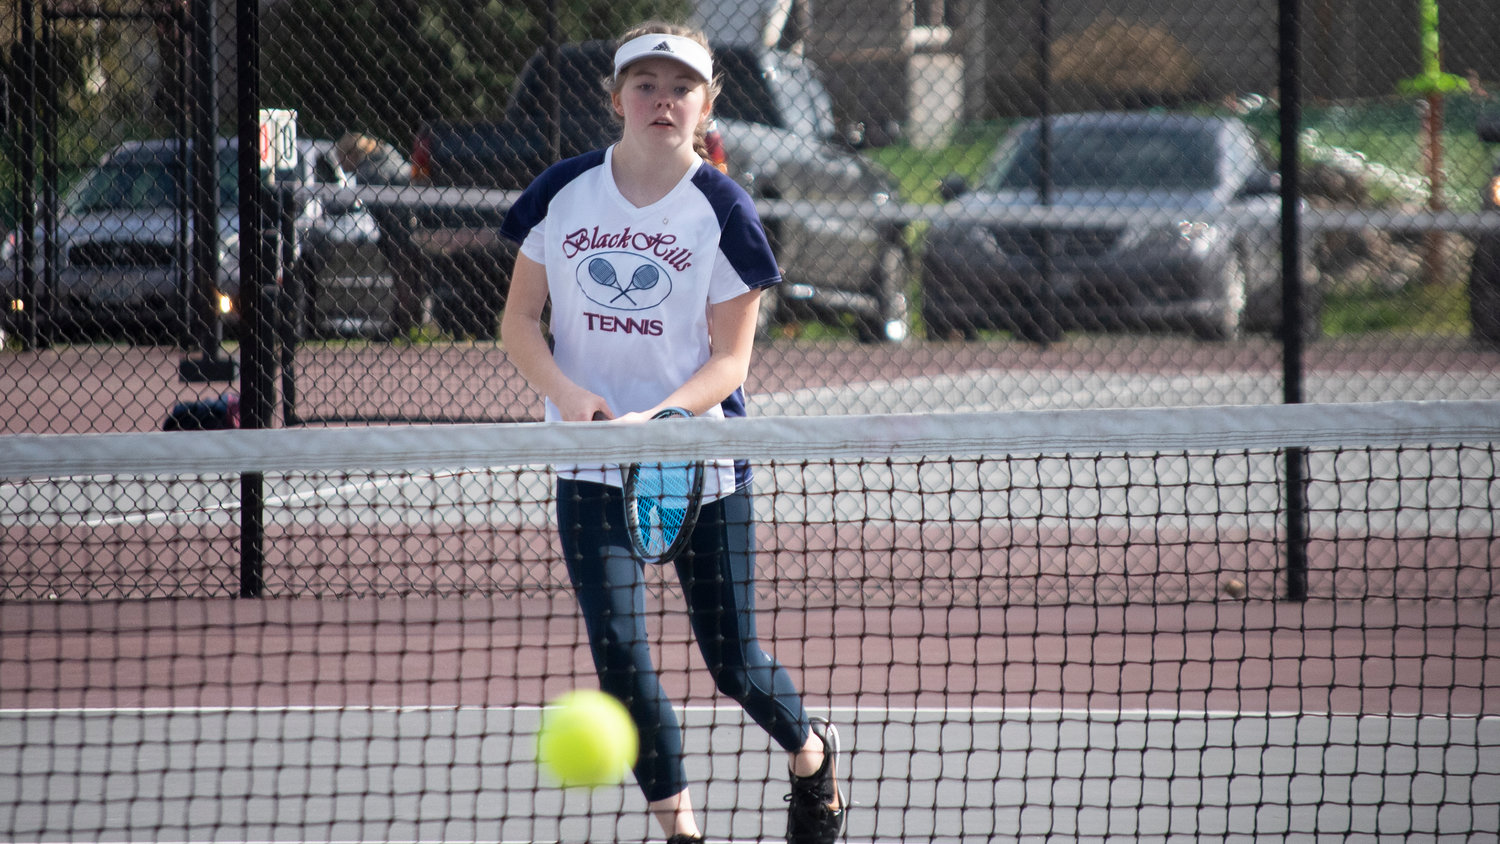 Black Hills’ second doubles player Chloe Whitcraft watches the ball during a match at W.F. West on Wednesday afternoon.